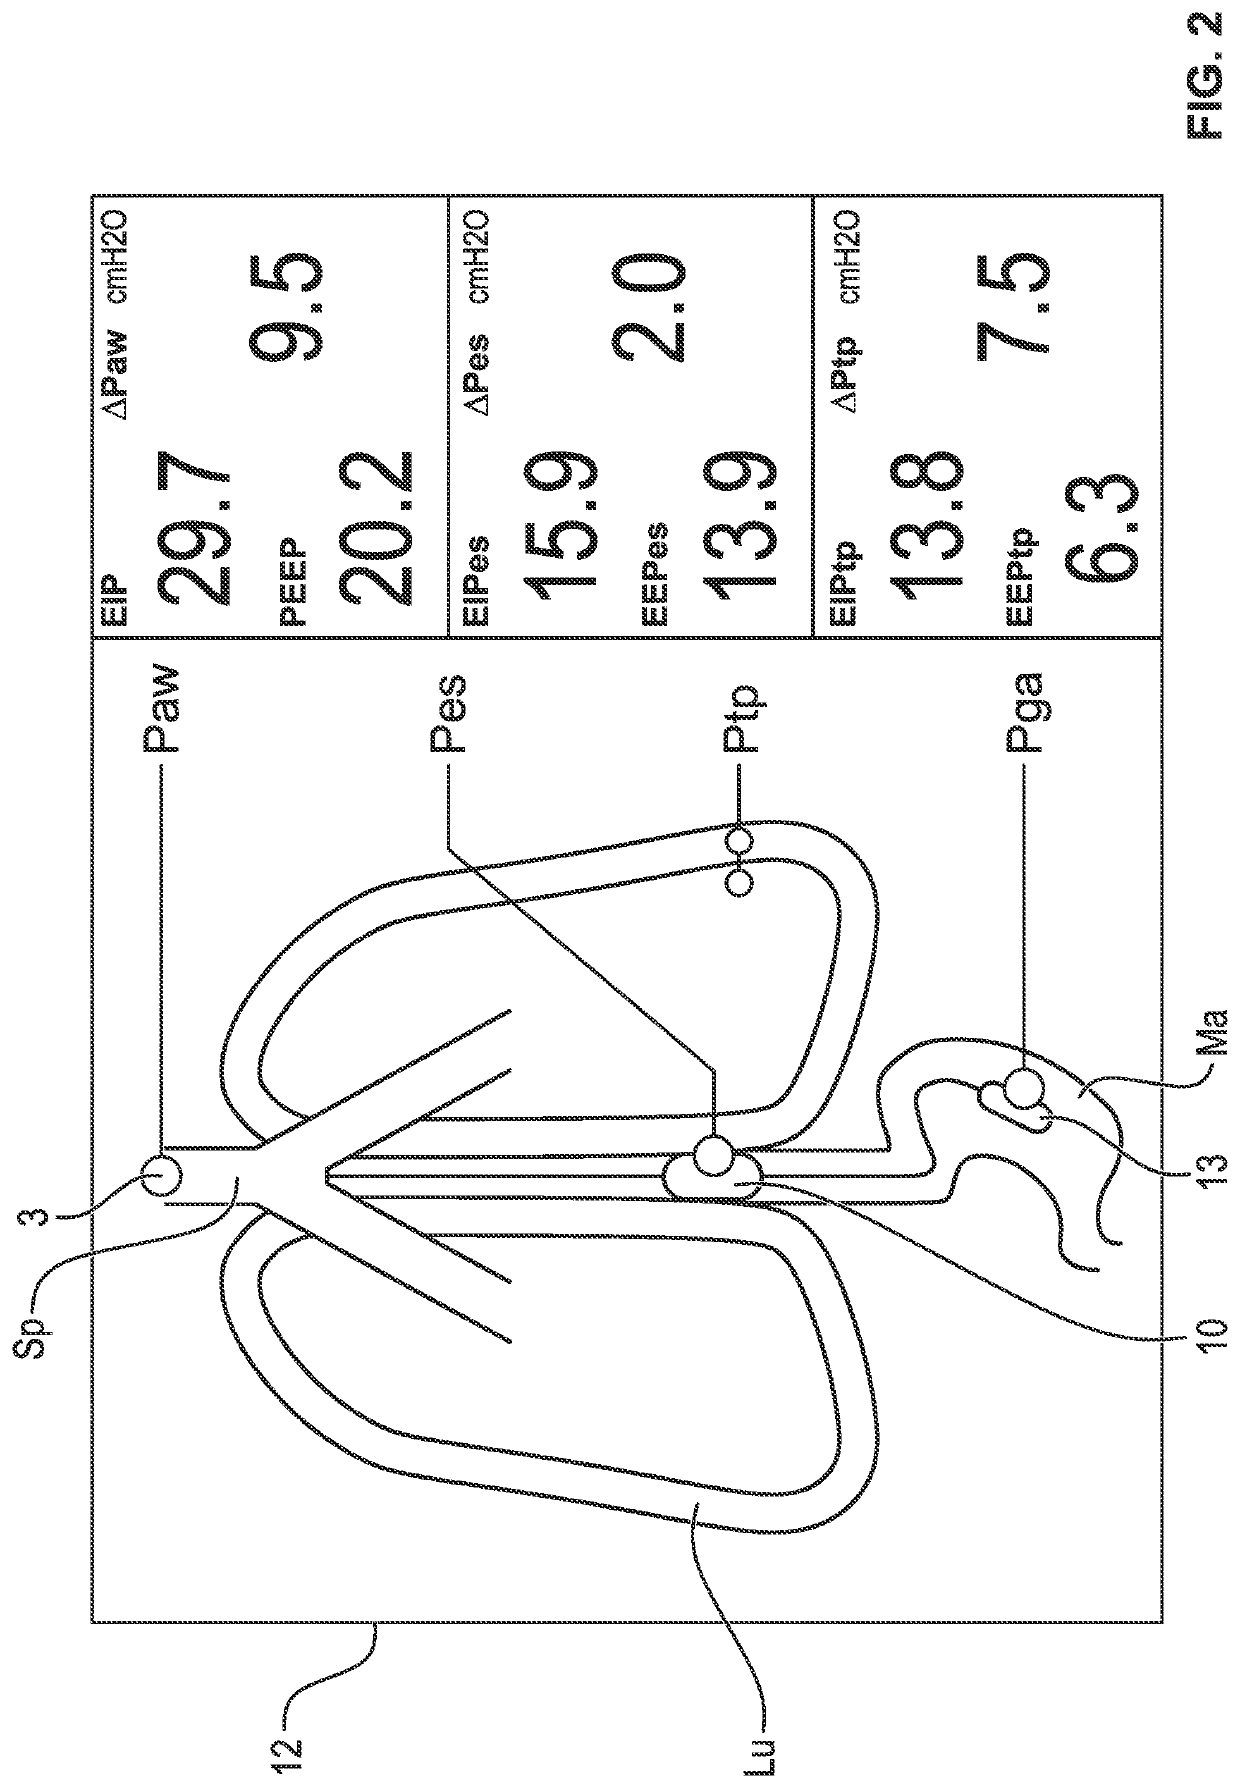 Device and process for measuring the lung compliance